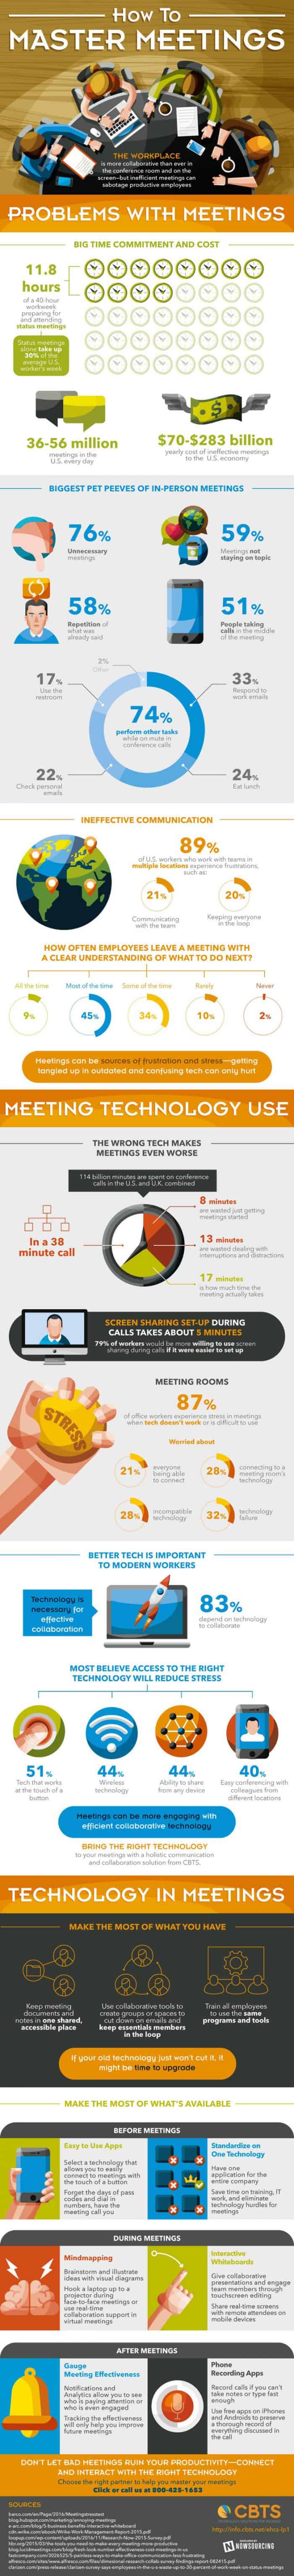 Meetings are mostly ineffective, but solid technology can save them.